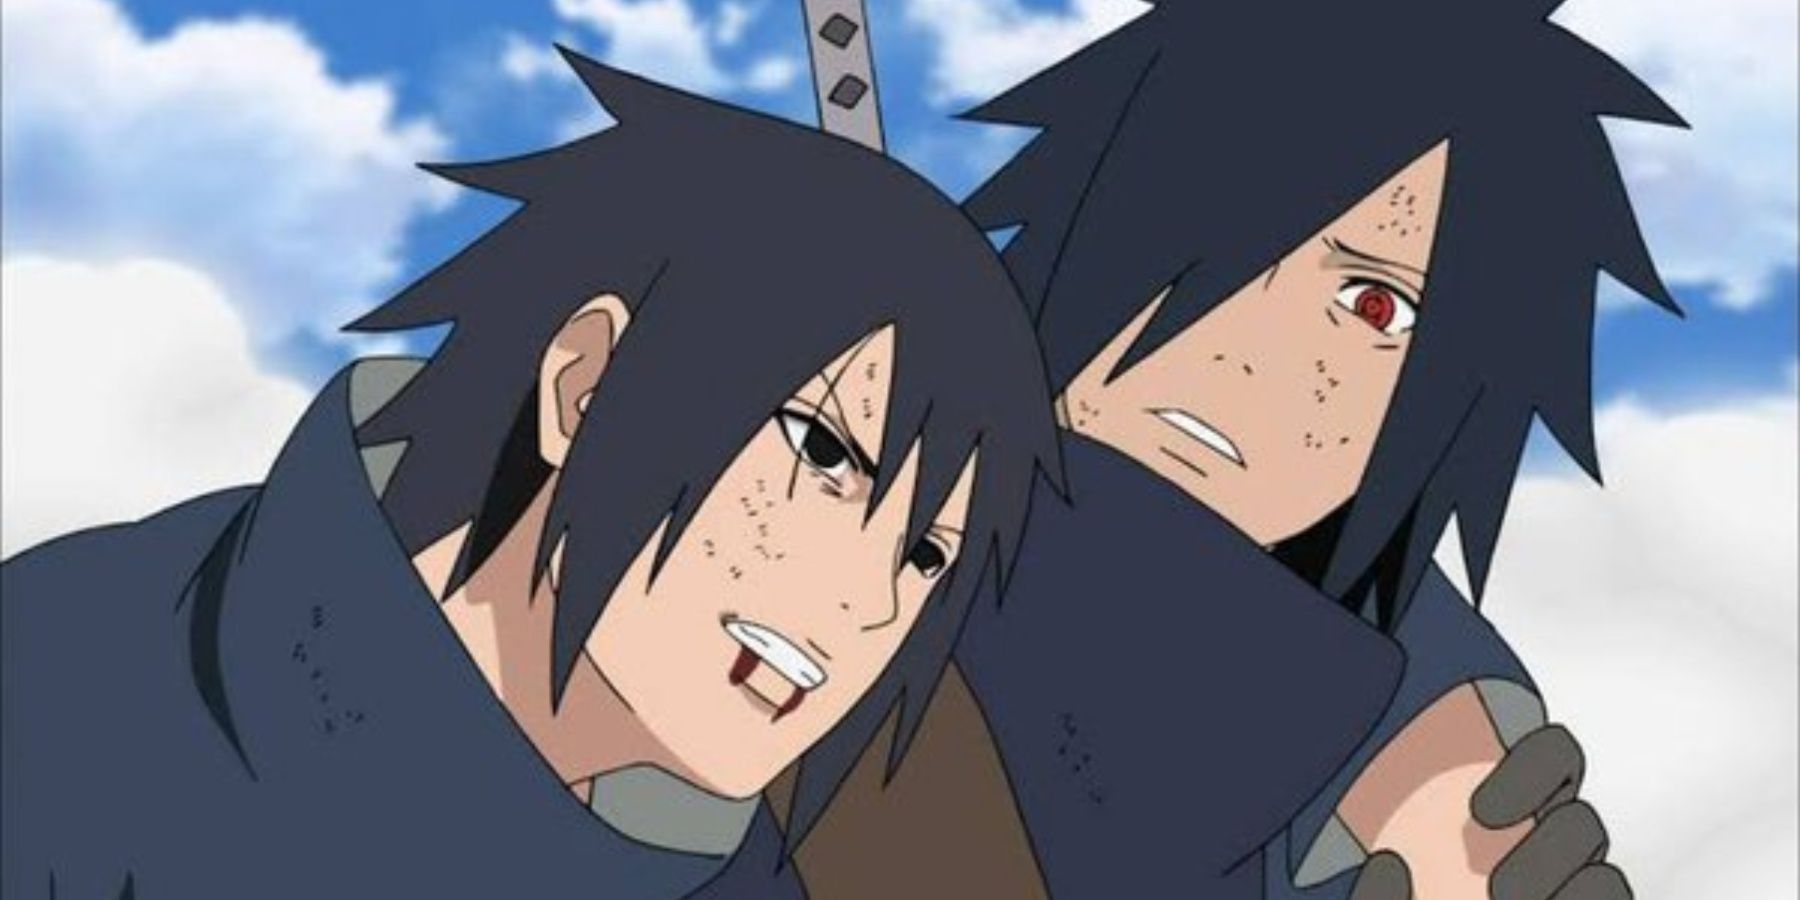 Madara Uchiha Concerned about his critically injured little brother in Naruto Shippuden